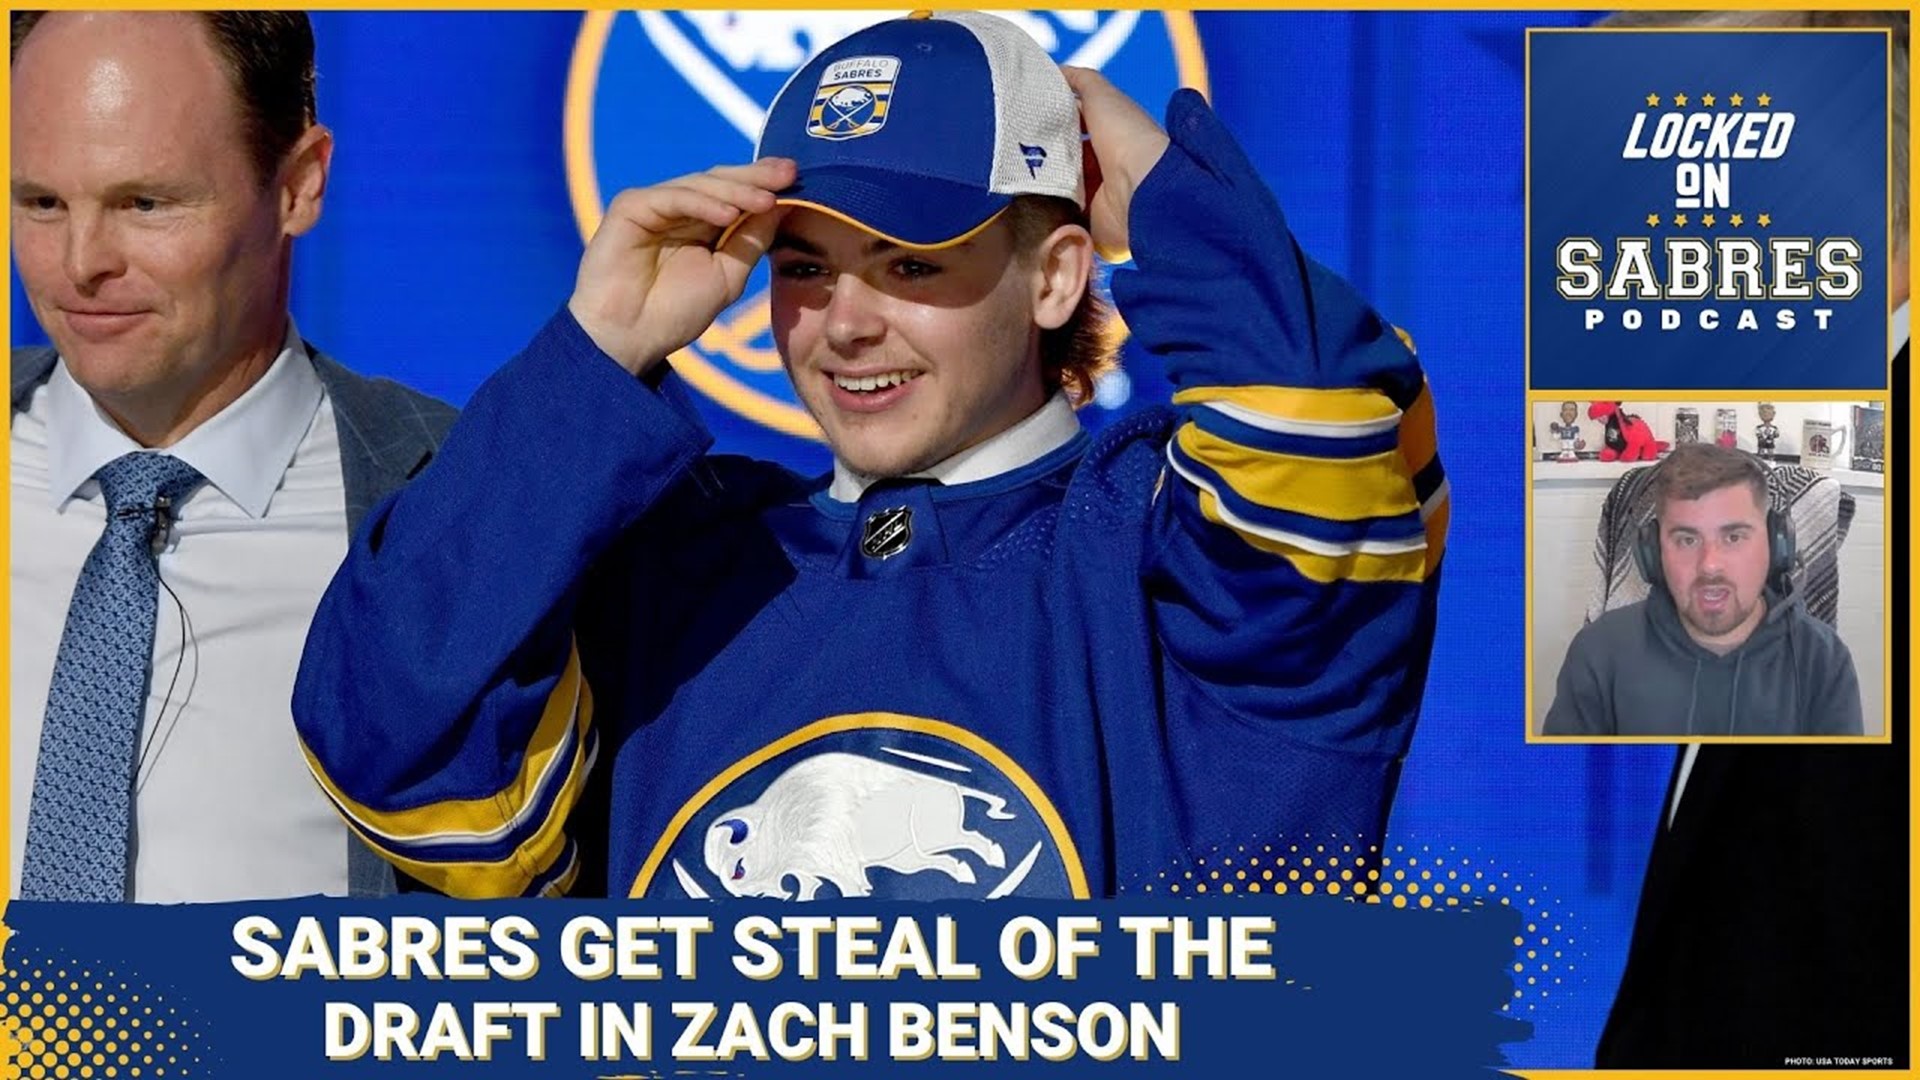 Zach Benson the steal of the draft for the Sabres